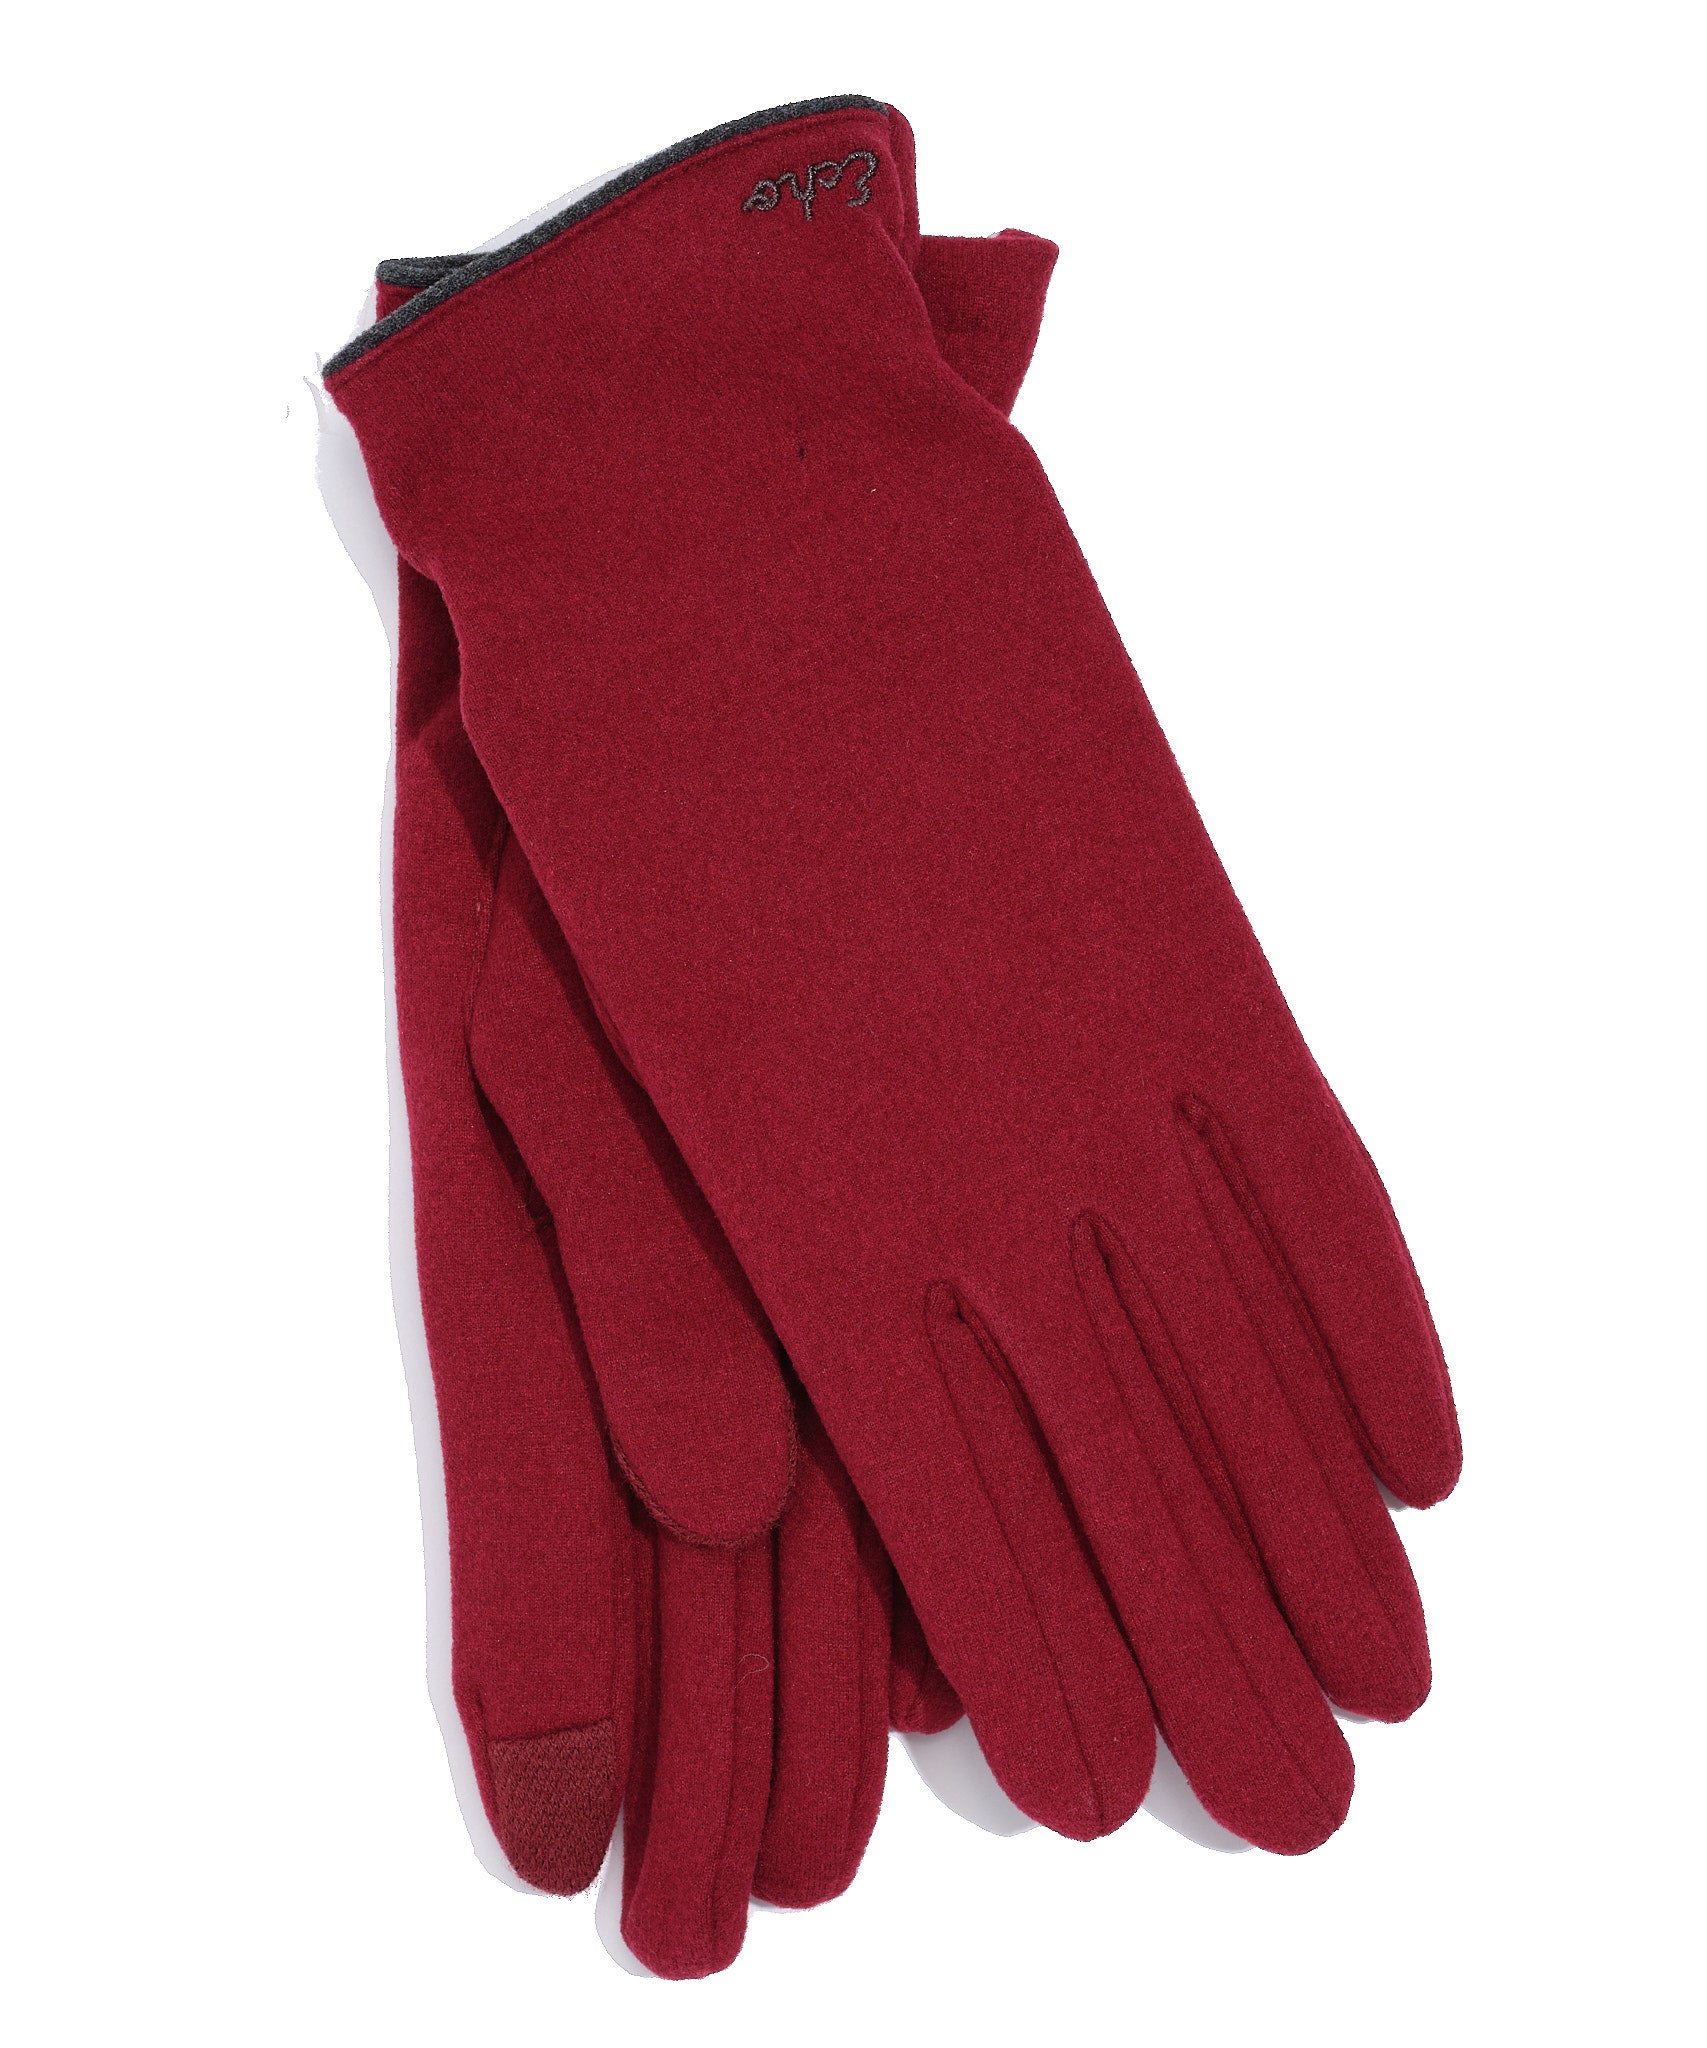 Cozy Stretch Touch Glove in color Garnet